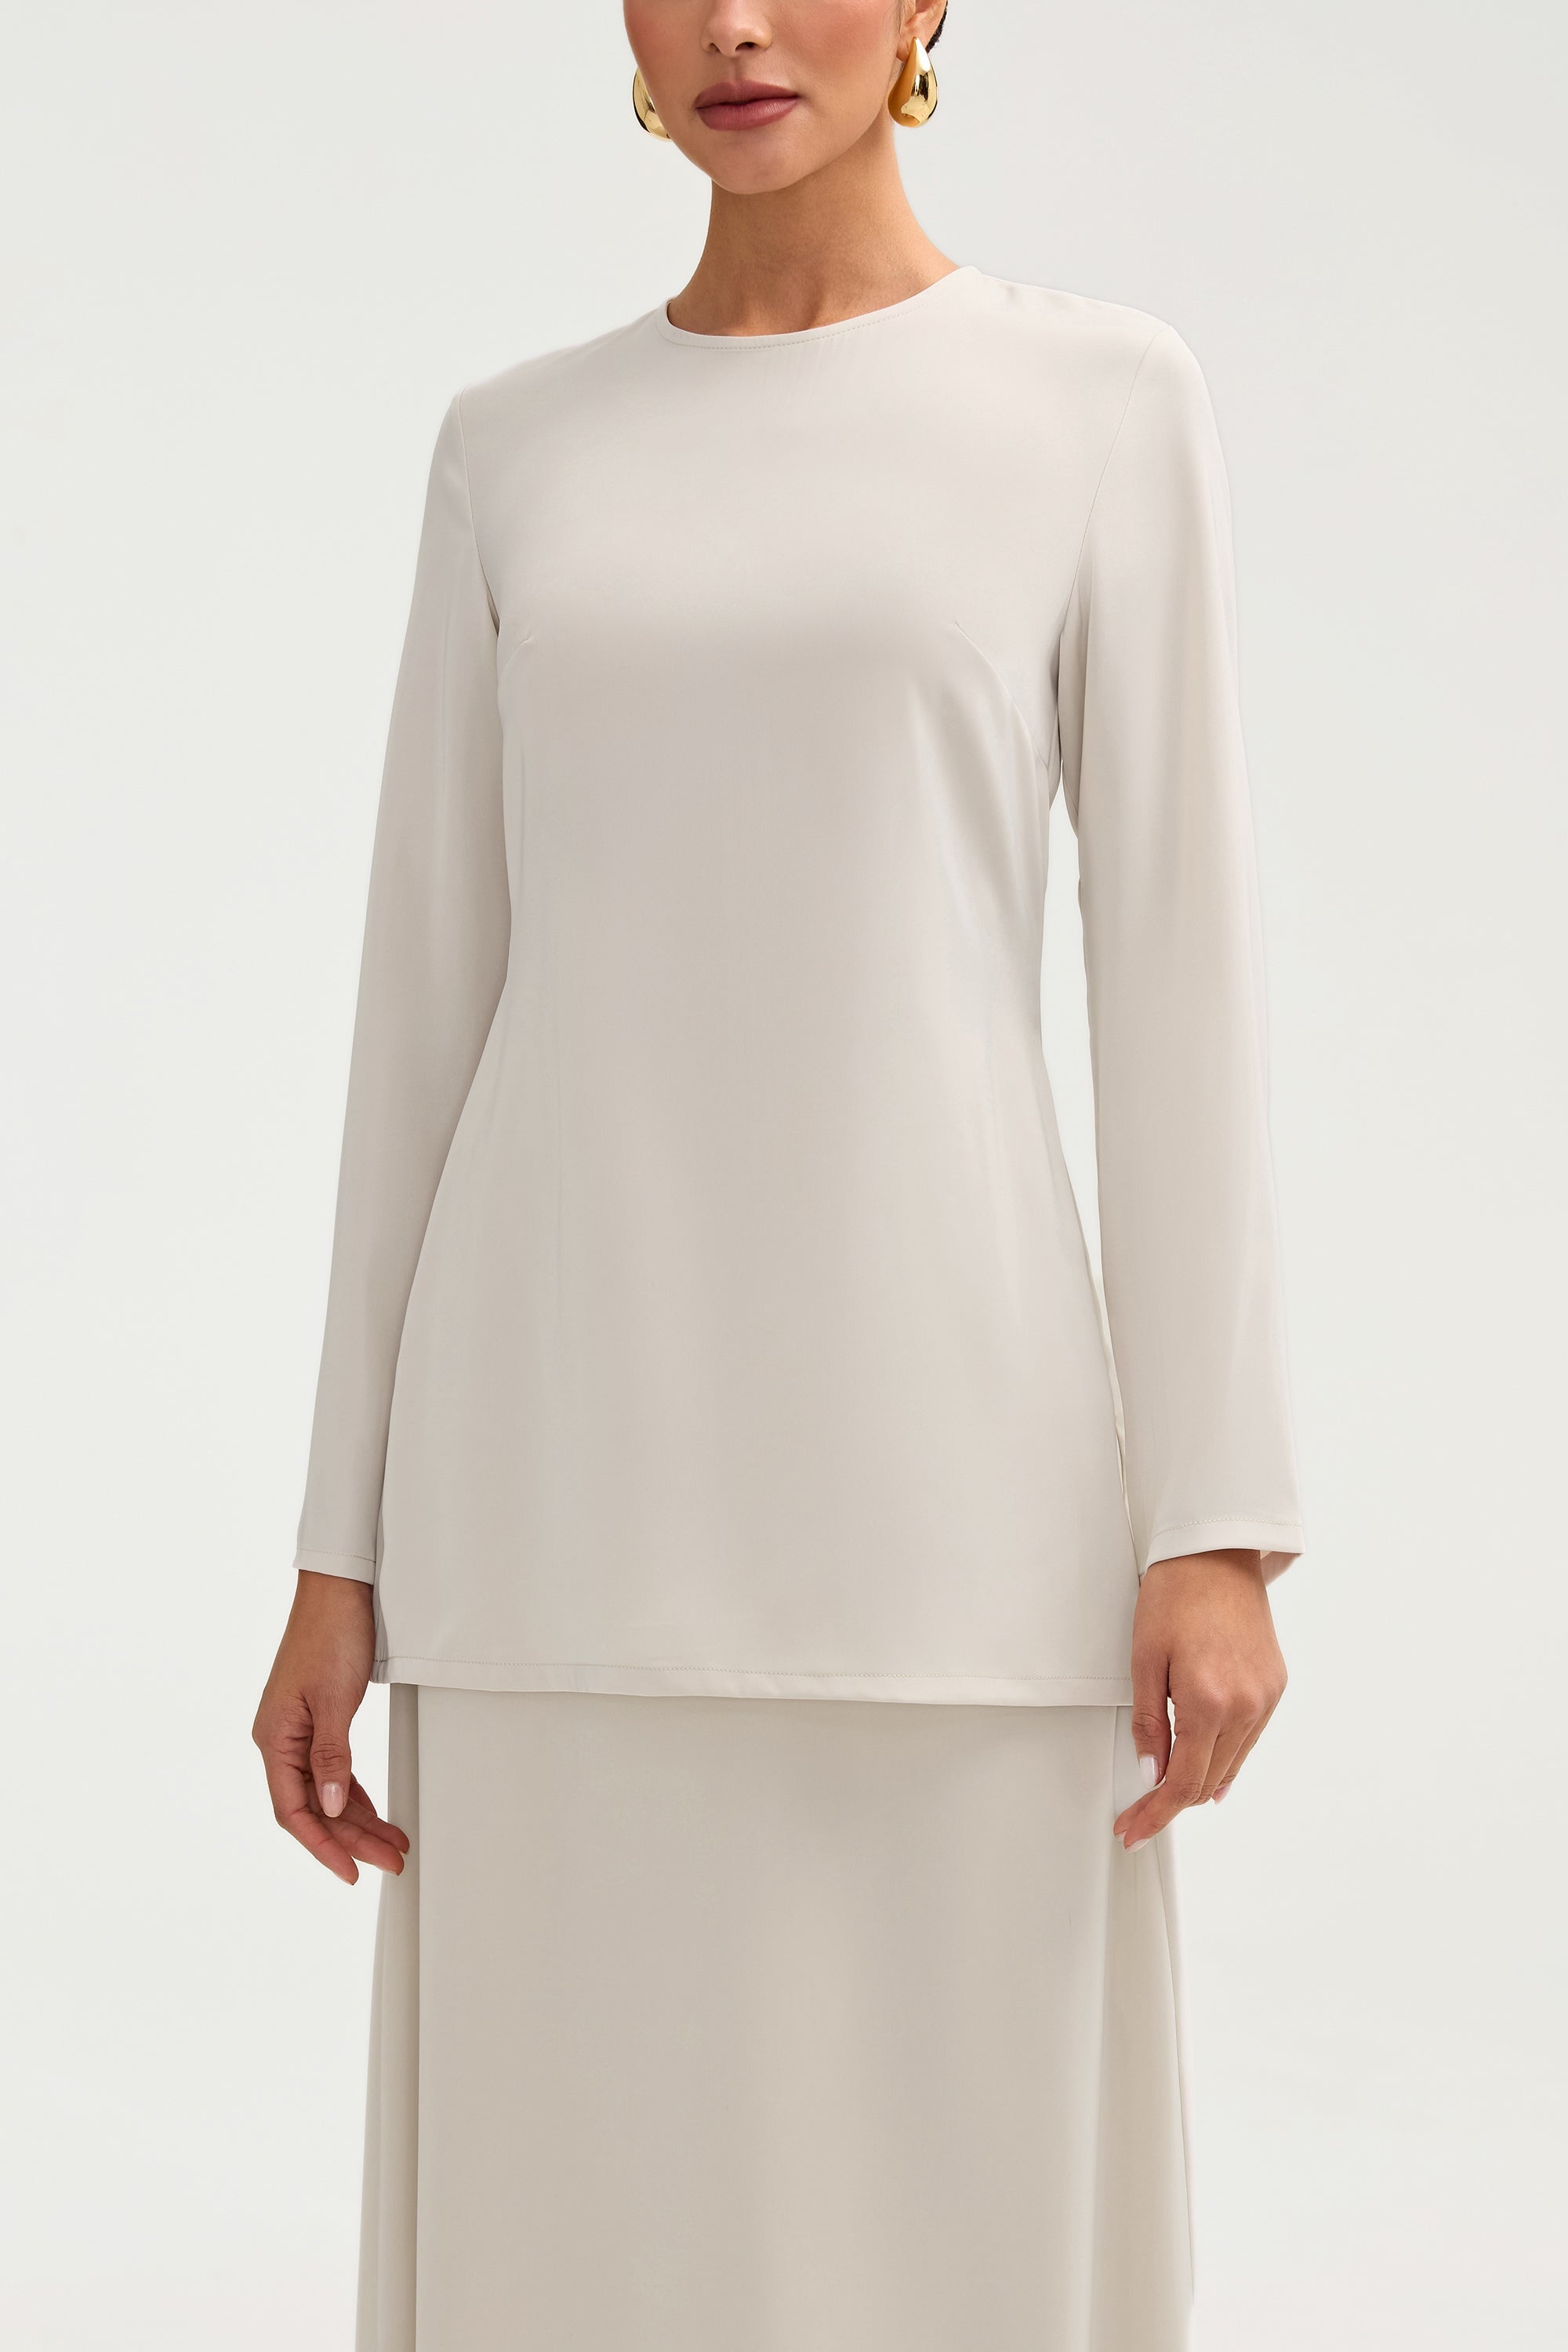 Essential Satin Top - Stone Clothing Veiled 